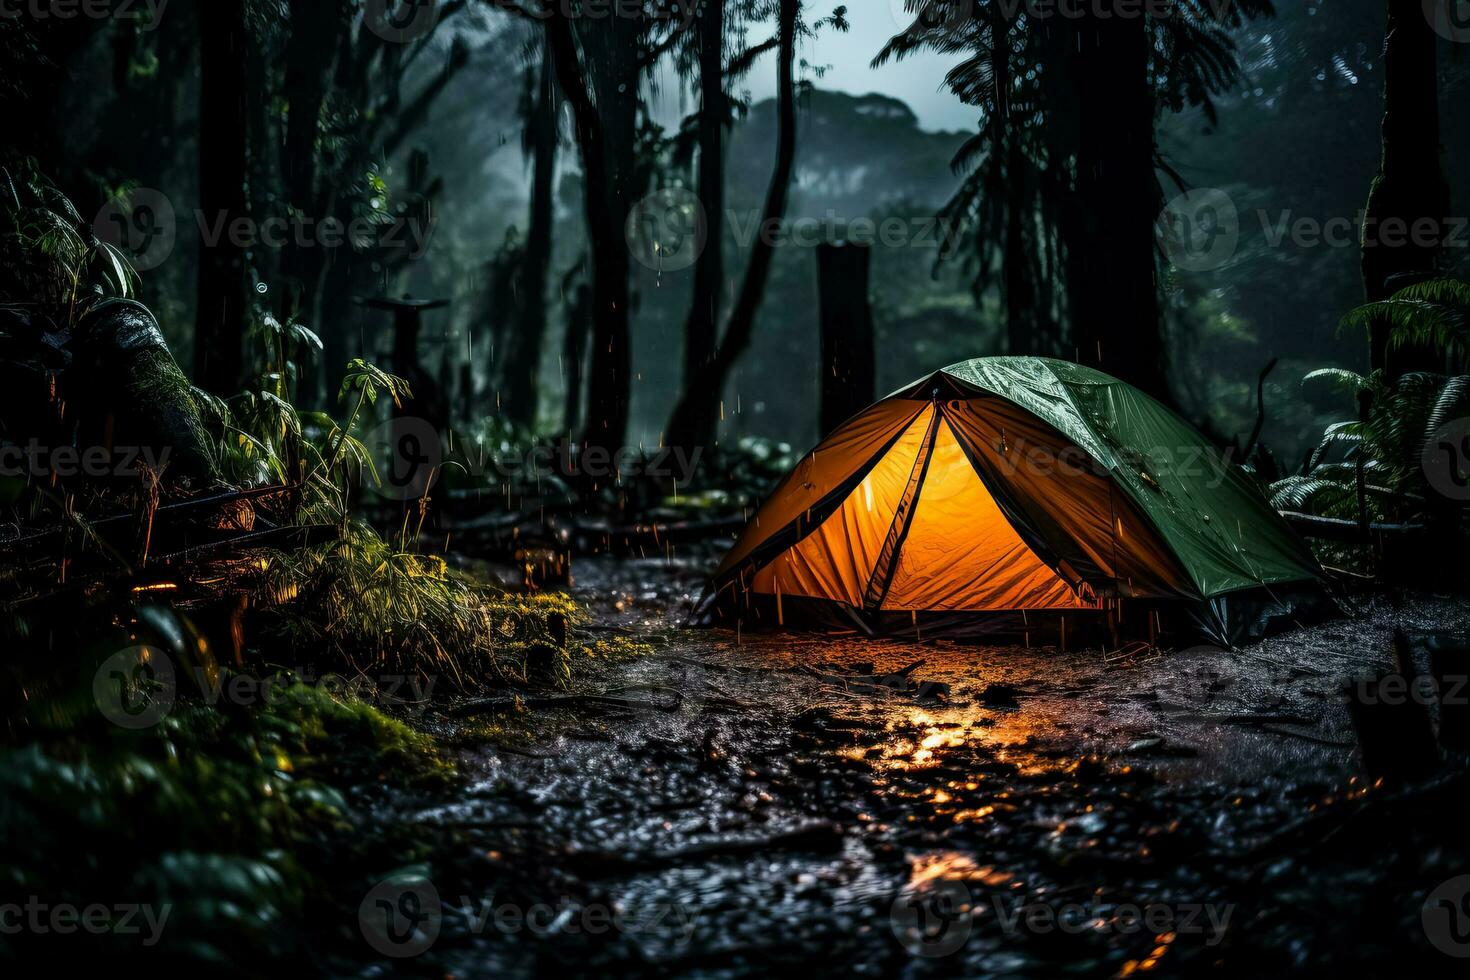 Rain on tent in forest tranquil night for peaceful camping and relaxing meditation in tropics photo